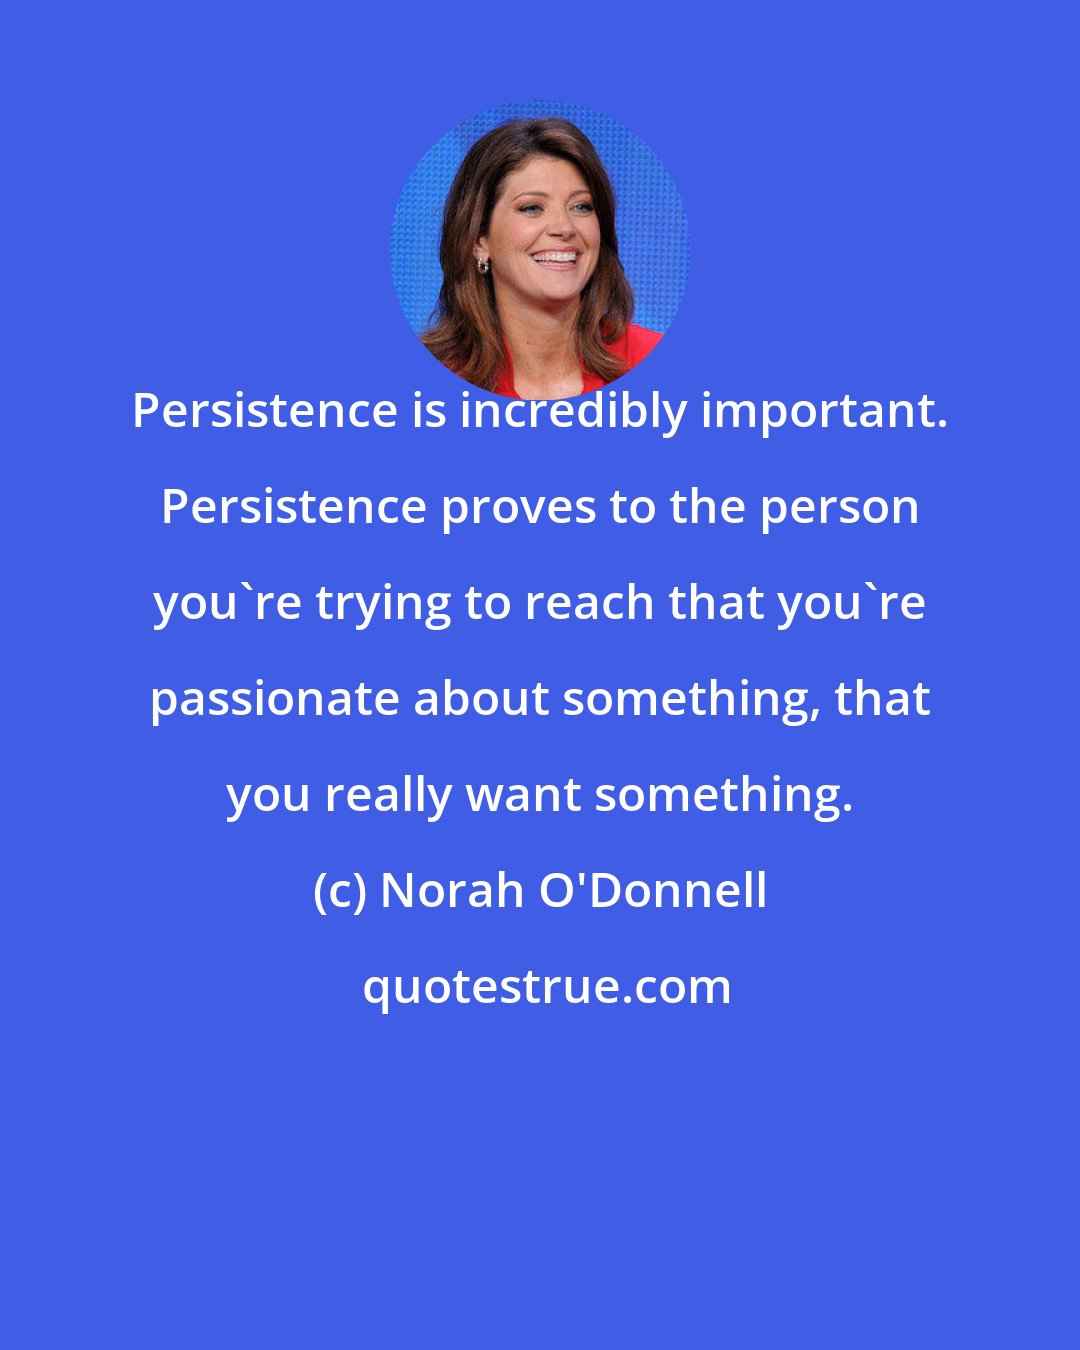 Norah O'Donnell: Persistence is incredibly important. Persistence proves to the person you're trying to reach that you're passionate about something, that you really want something.